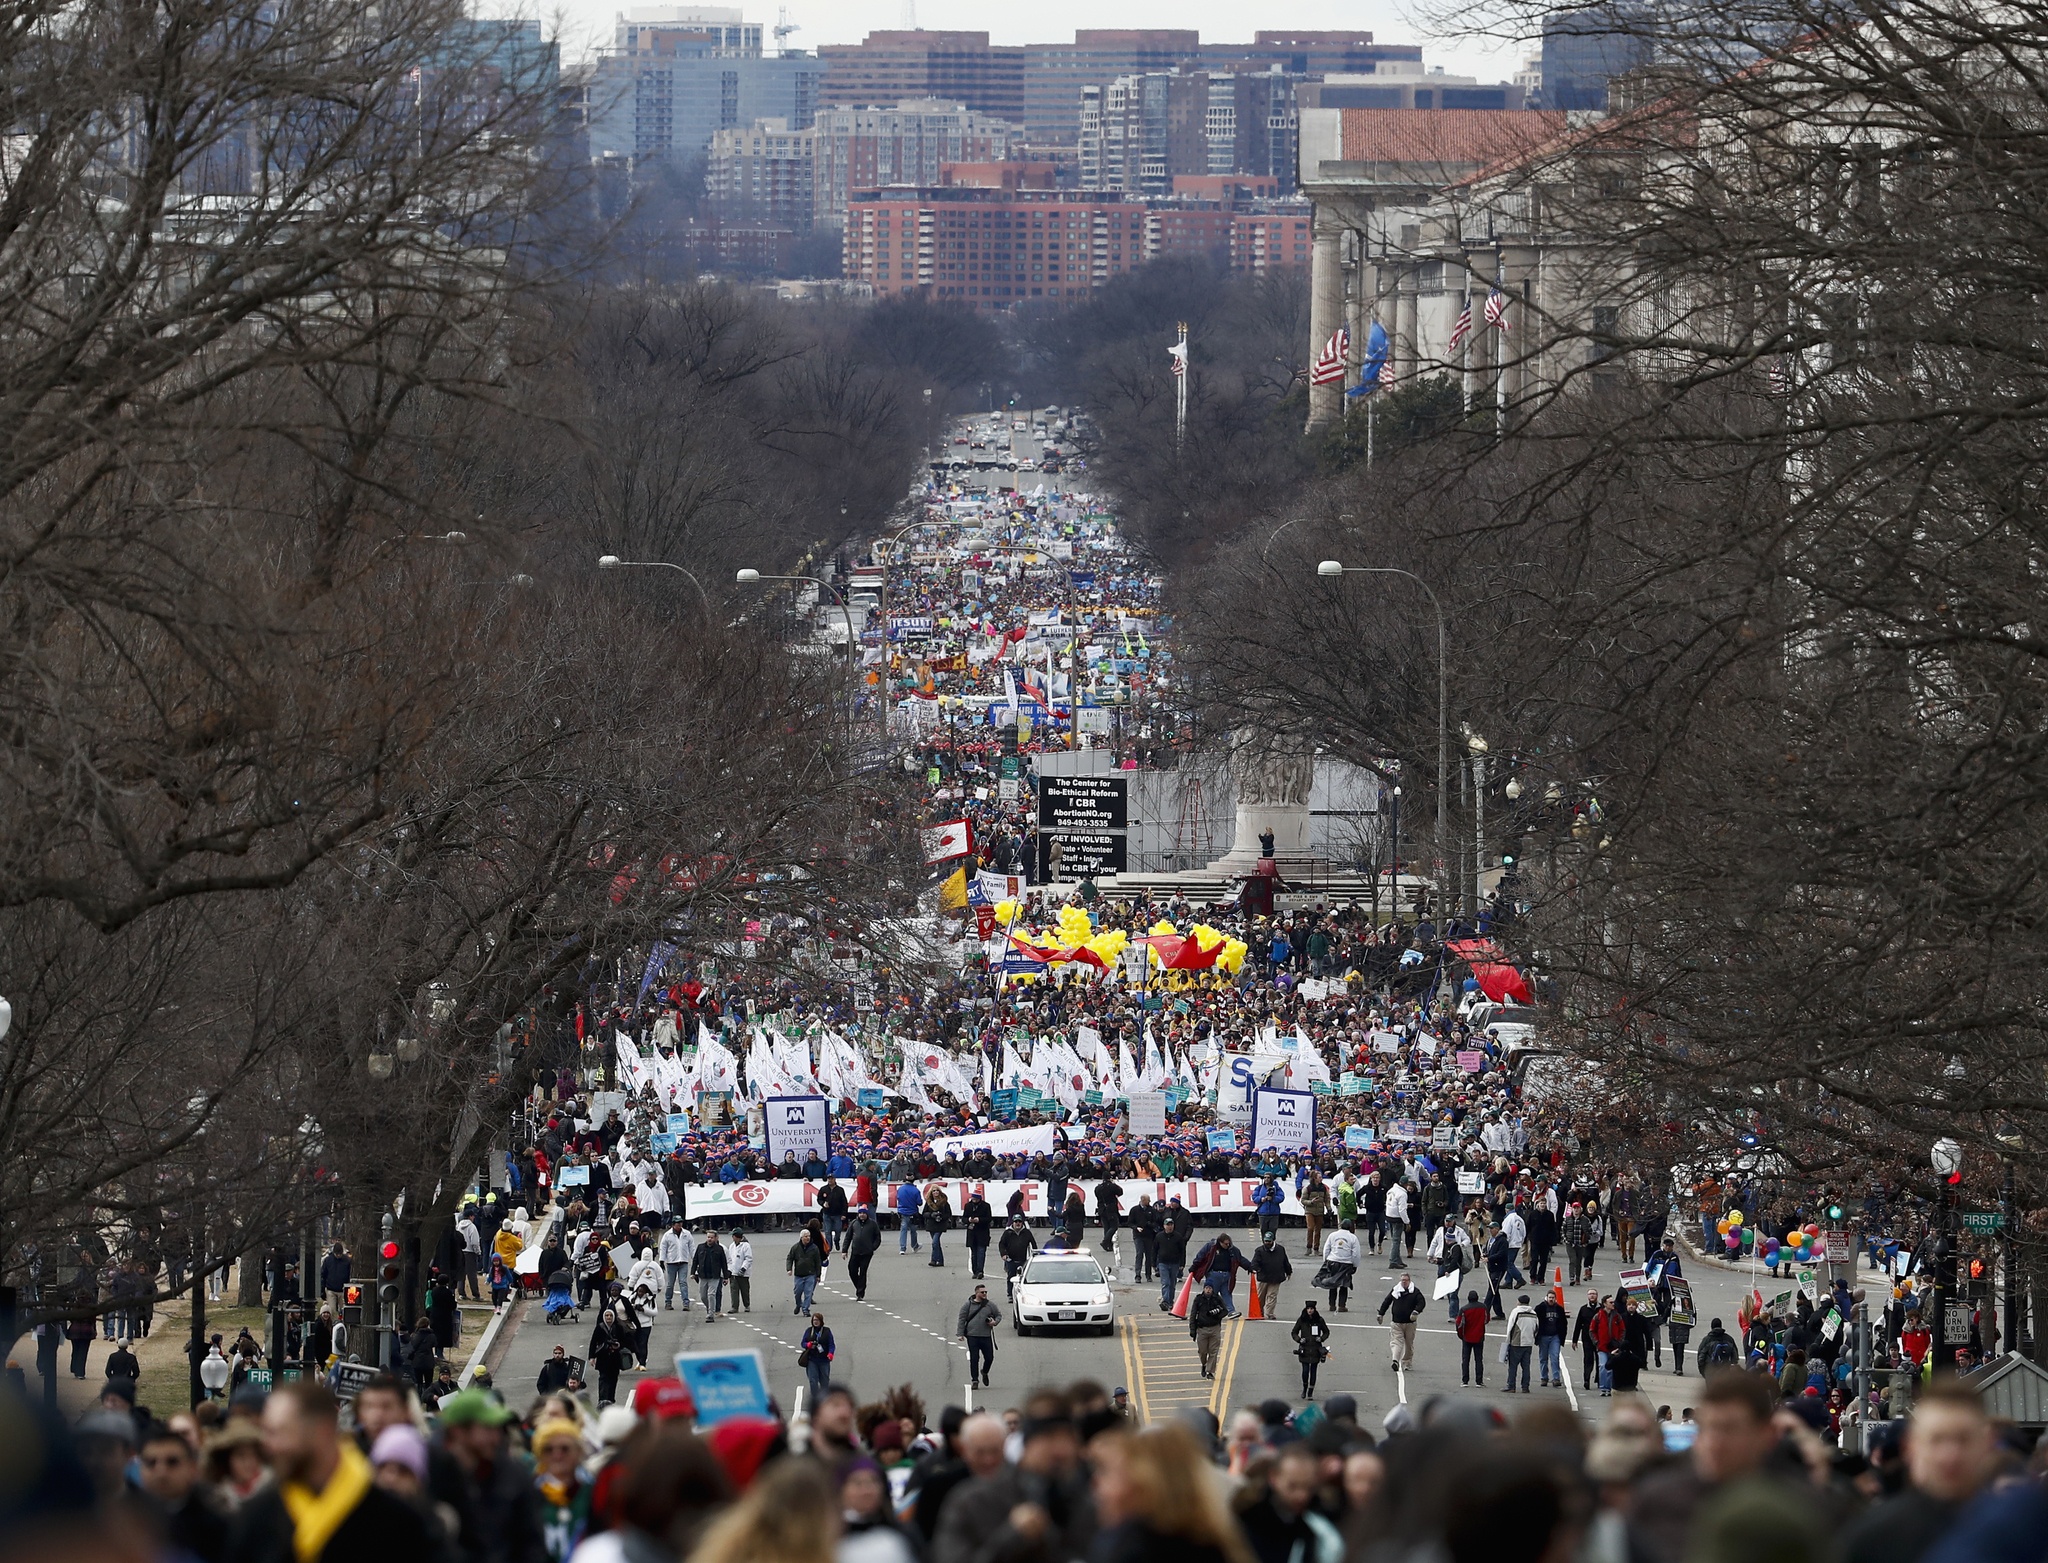 Anti-abortion activists march up Constitution Avenue en route to the Supreme Court in Washington, D.C., on Friday during the 44th annual March for Life. (Carolyn Kaster/The Associated Press)